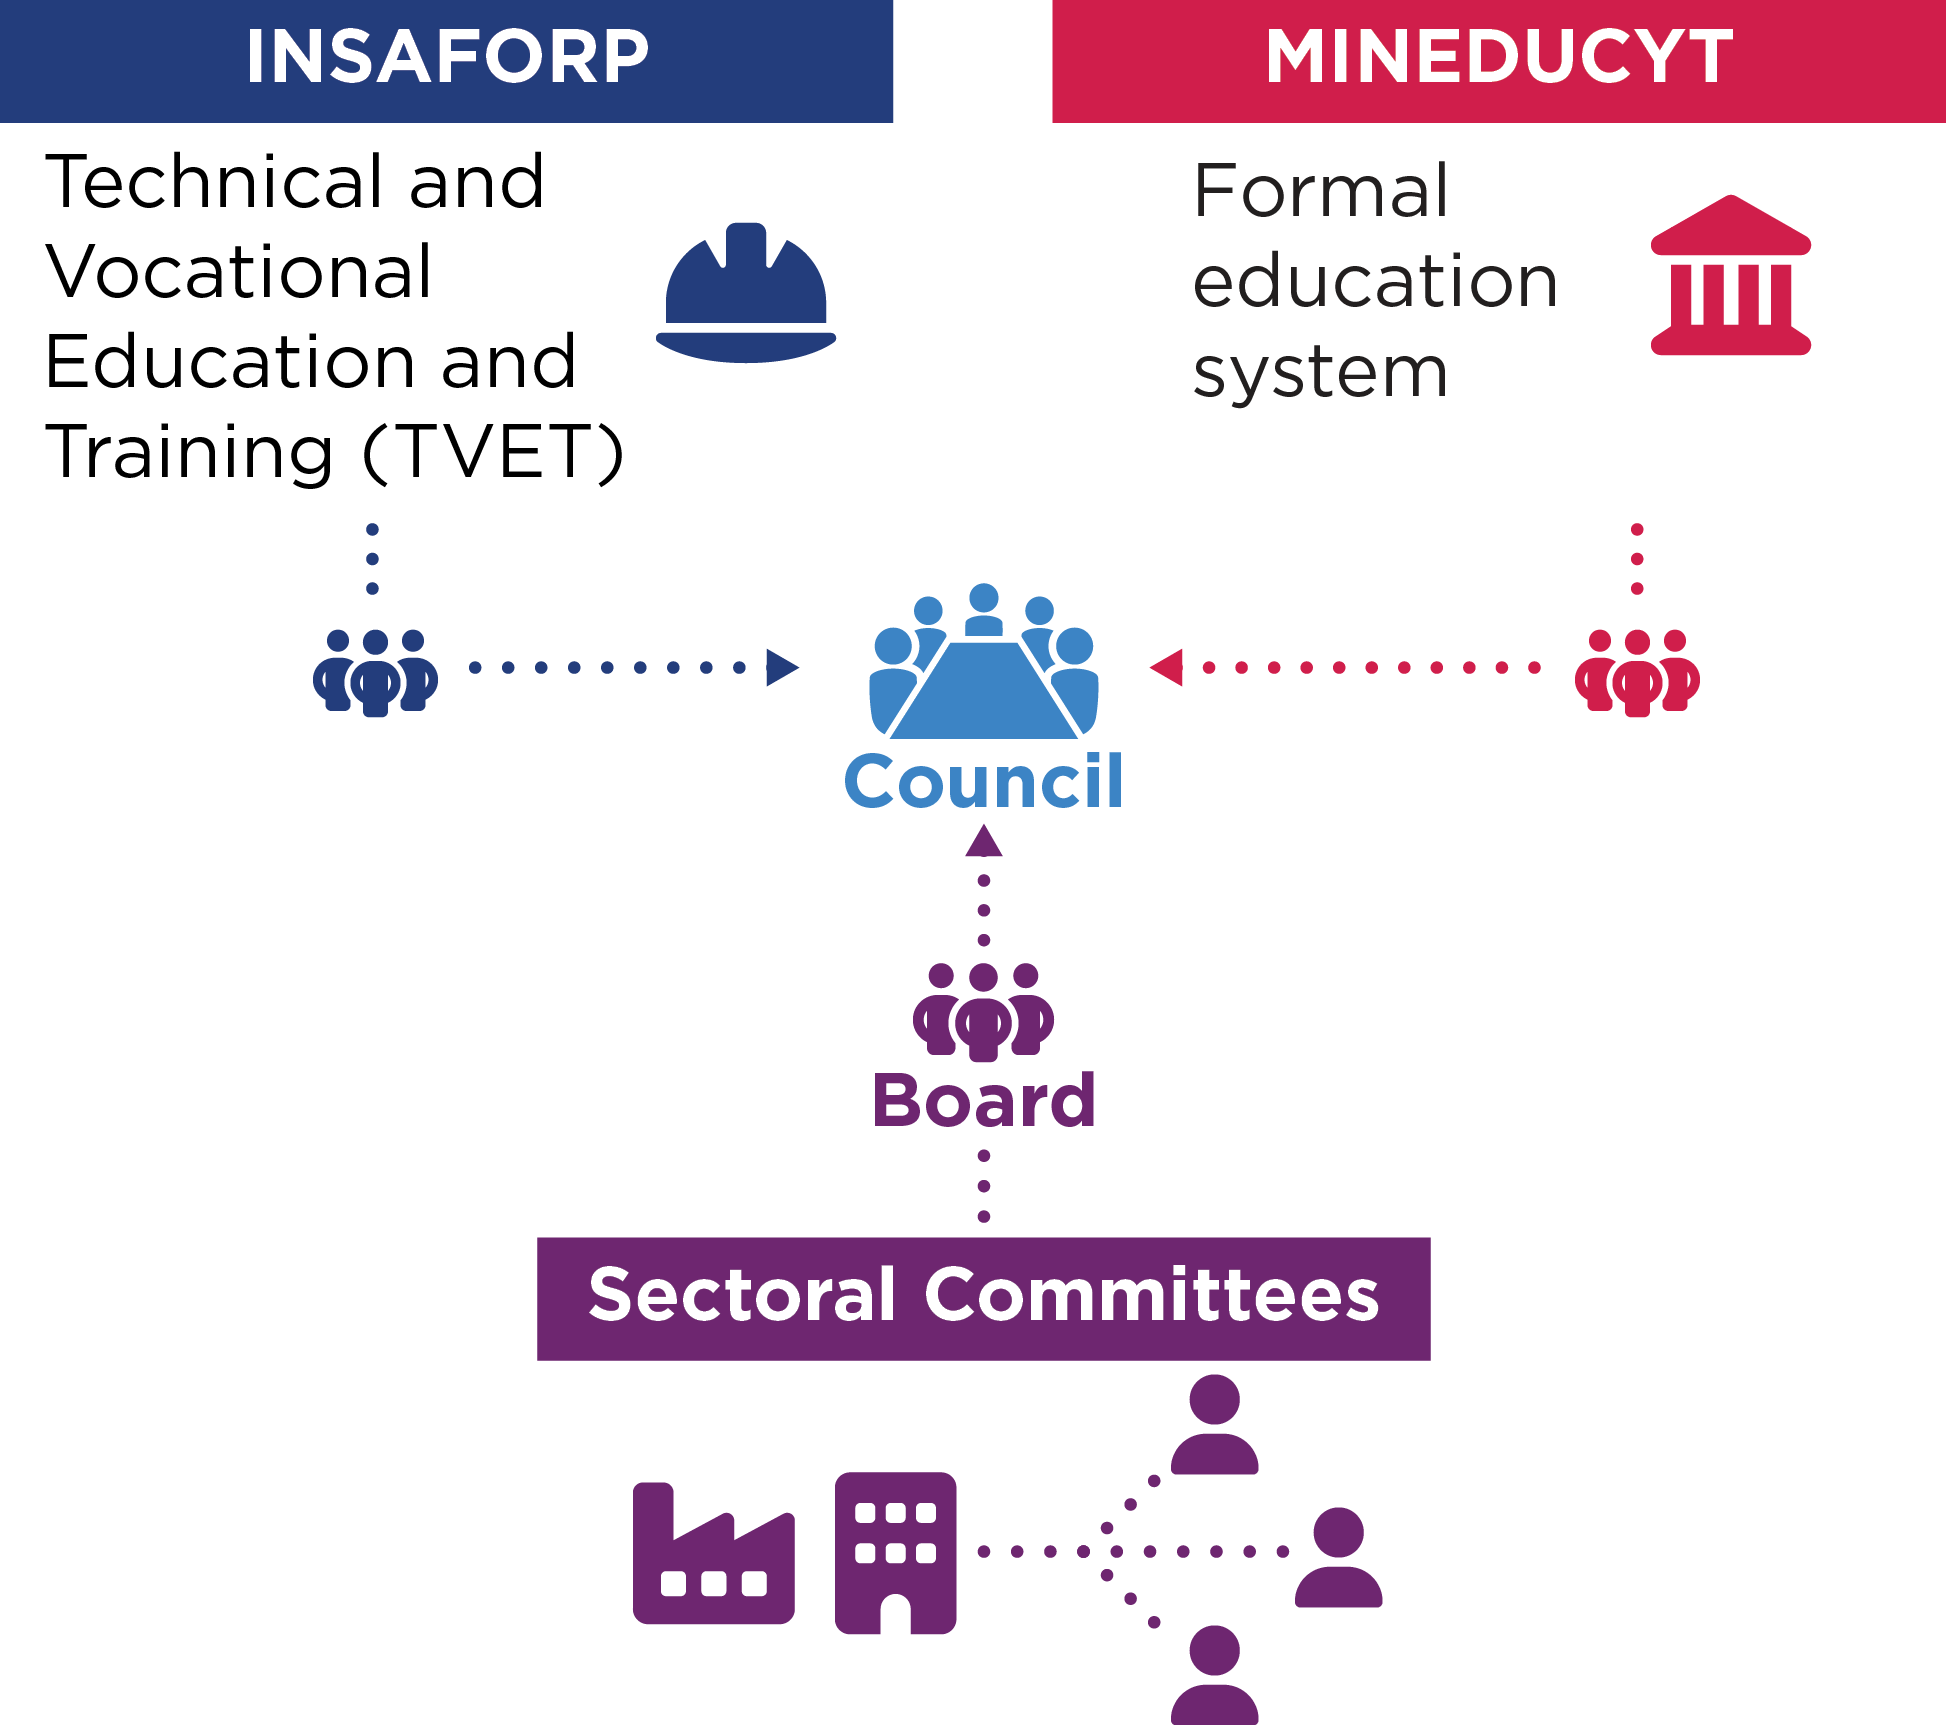 The chart shows a high-level illustration of the key stakeholders, including the Sectoral Committee Board and the Coordination Council of the TVET system.